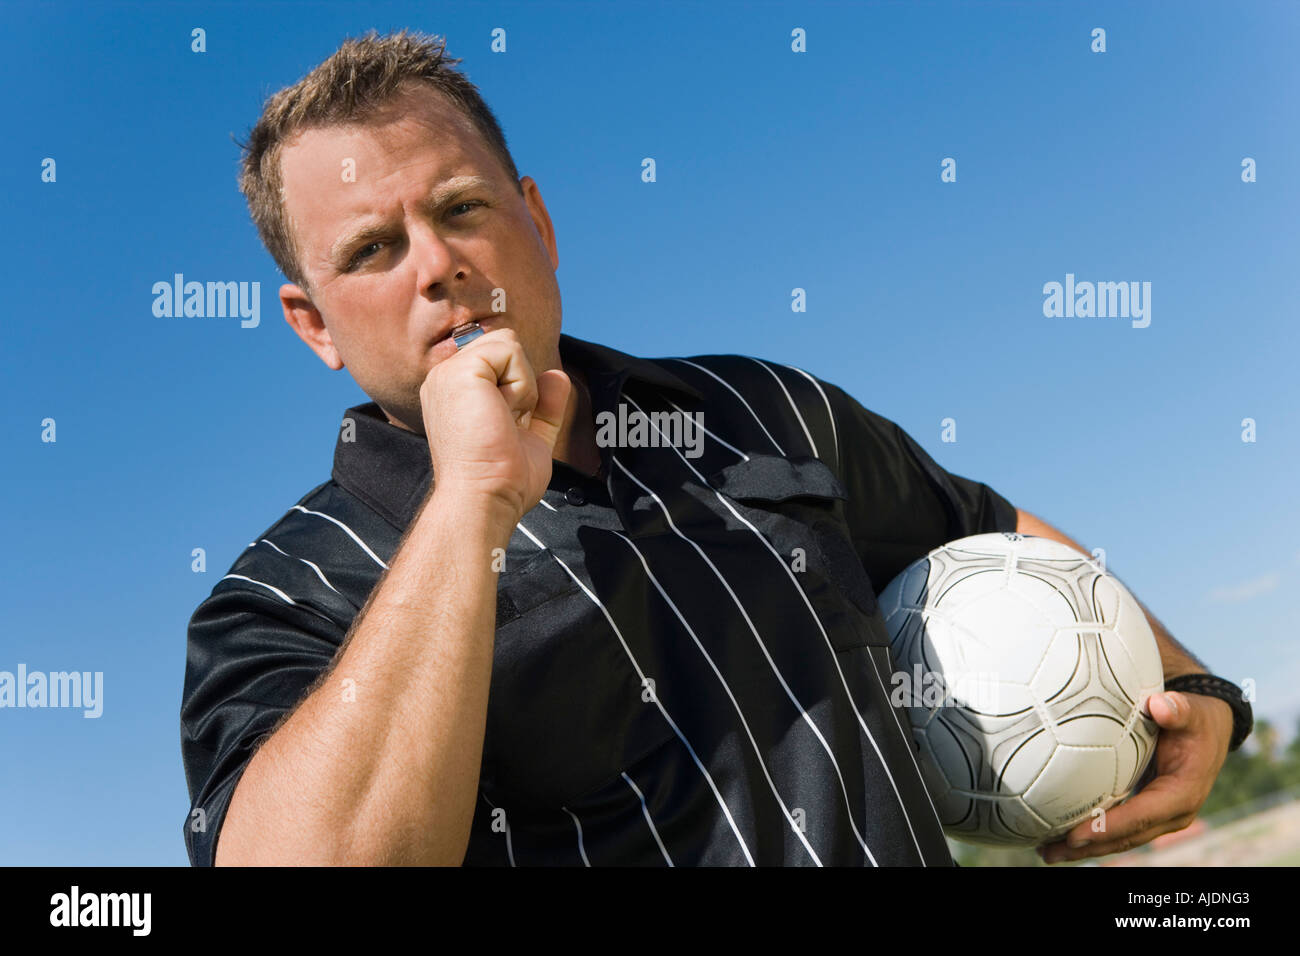 Soccer referee blowing whistle, portrait Stock Photo